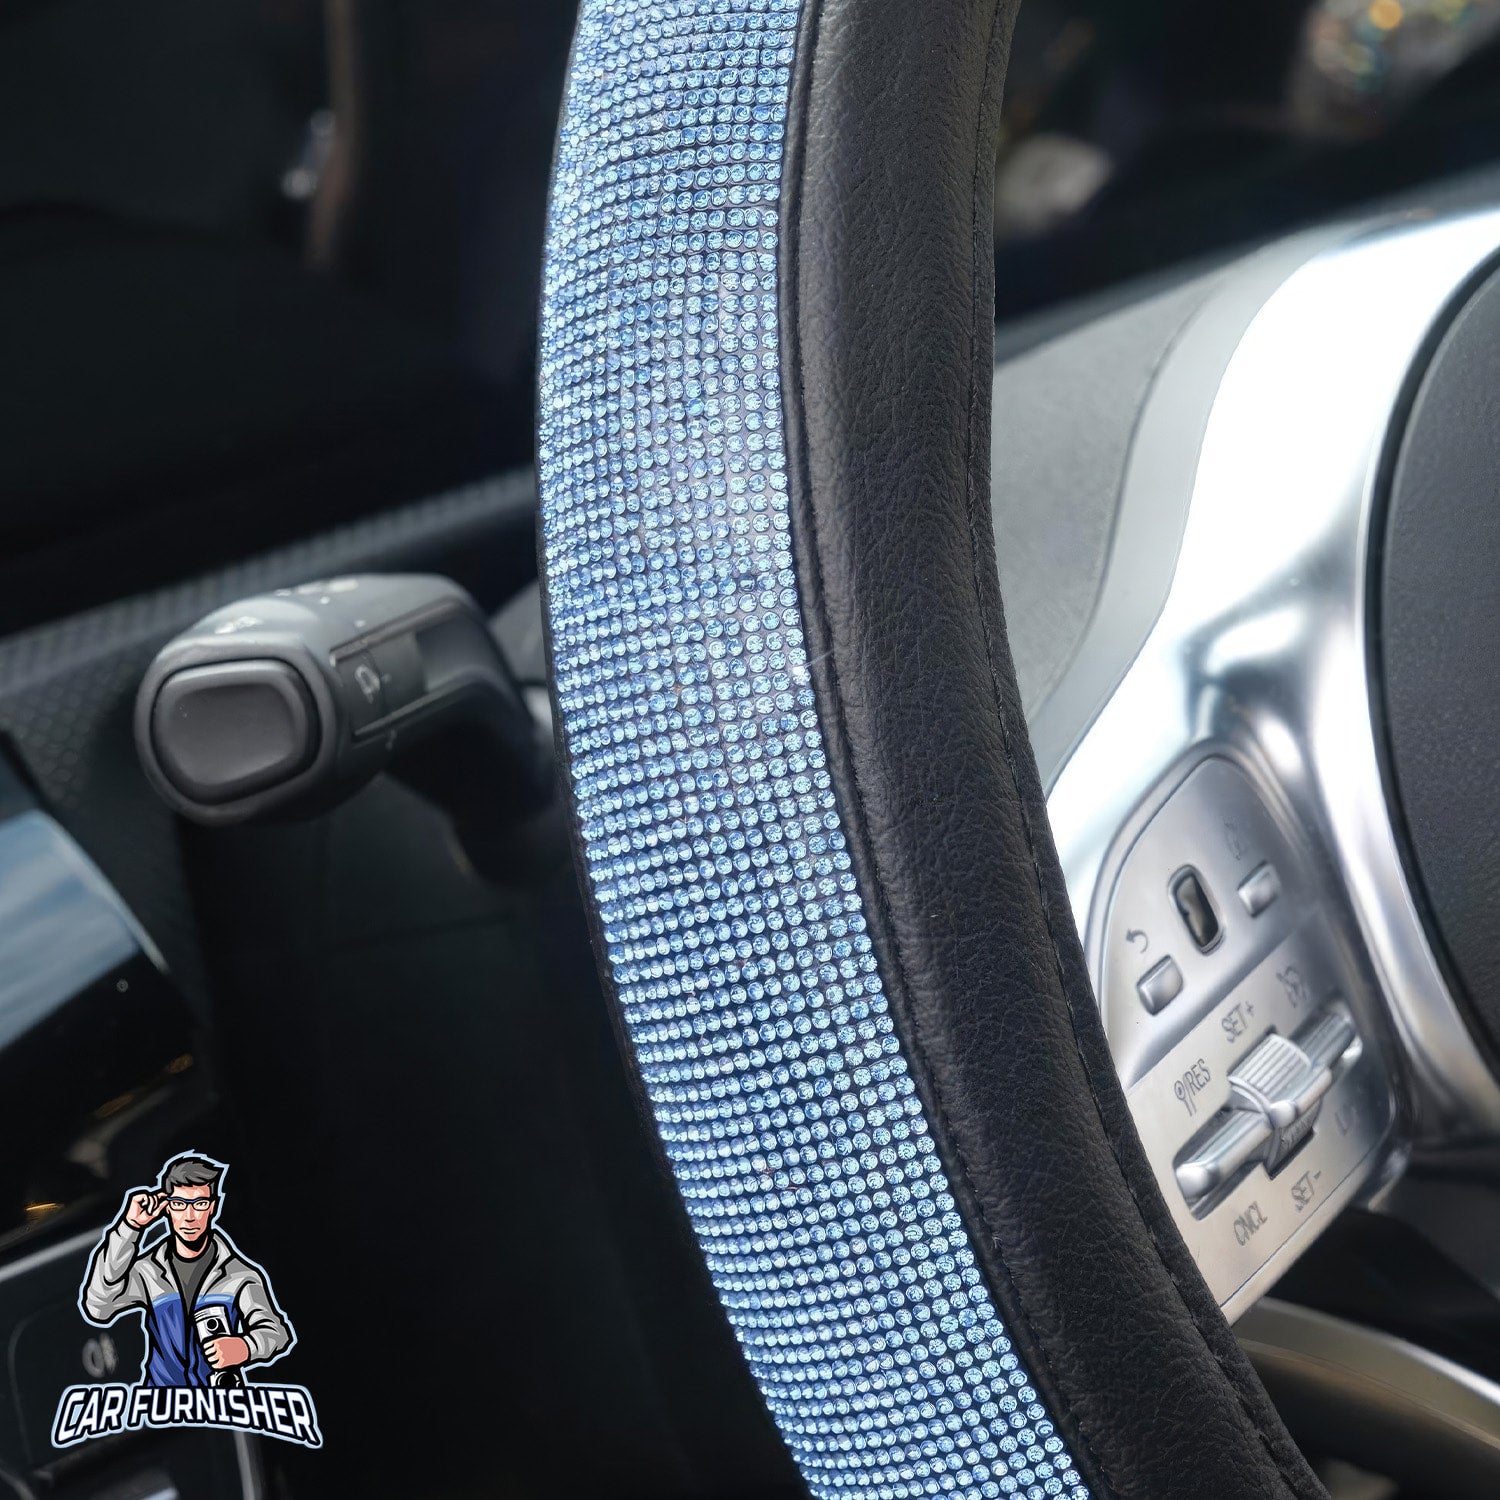 Sparkling Luxury Bling Steering Wheel Cover | Swarovski Crystals Blue Leather & Fabric